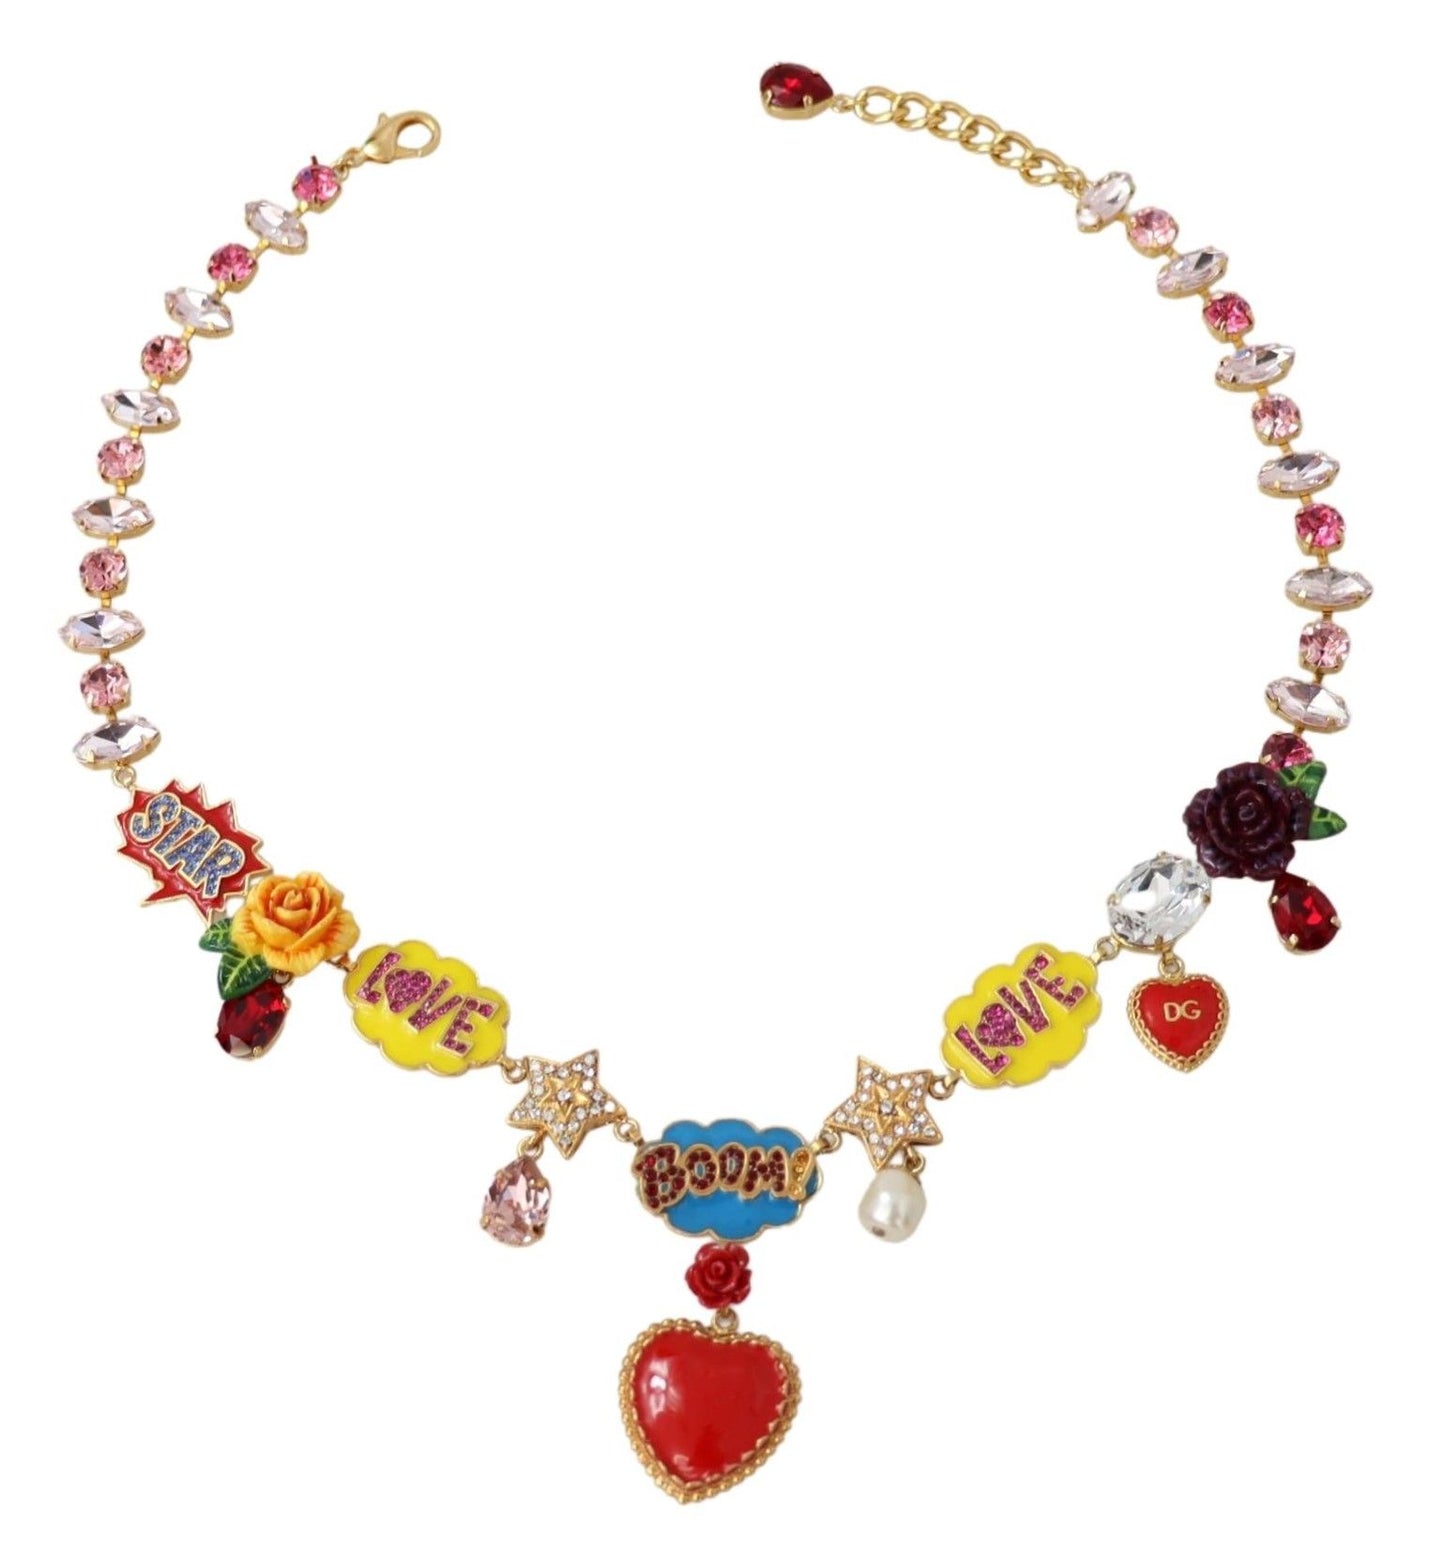 Dolce & Gabbana Chic Gold Tone Crystal Charm Necklace